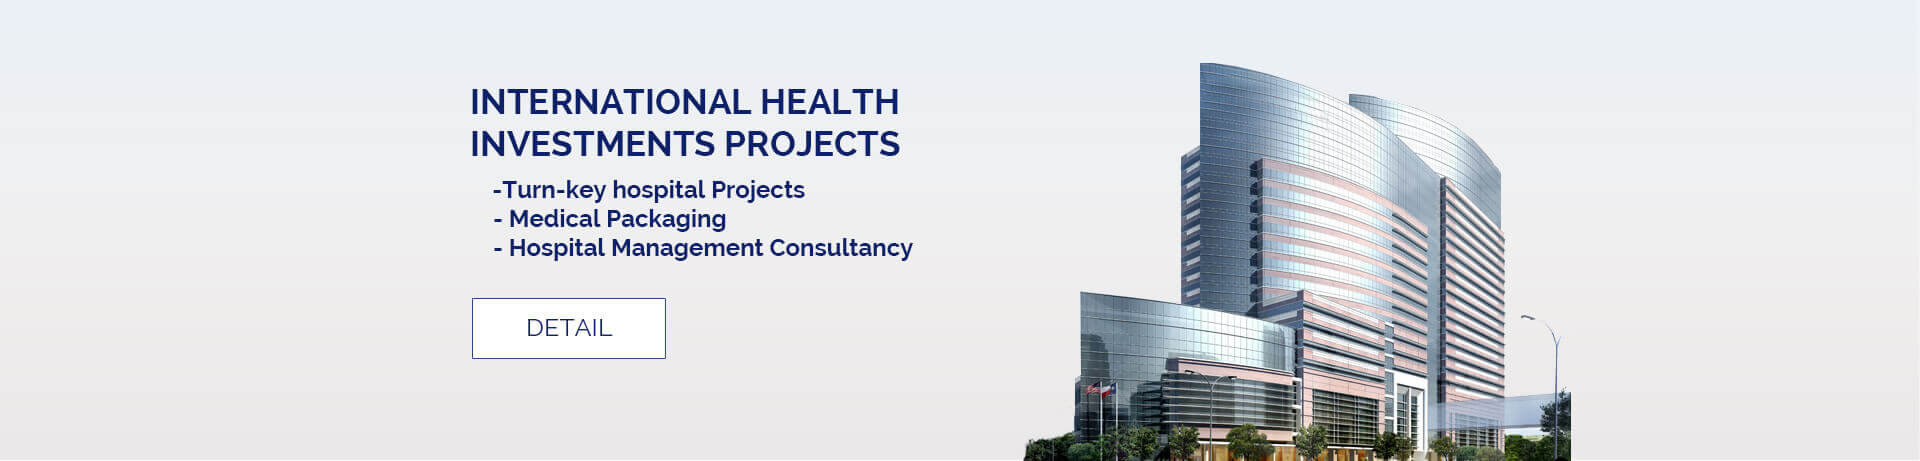 International Health Investment Projects